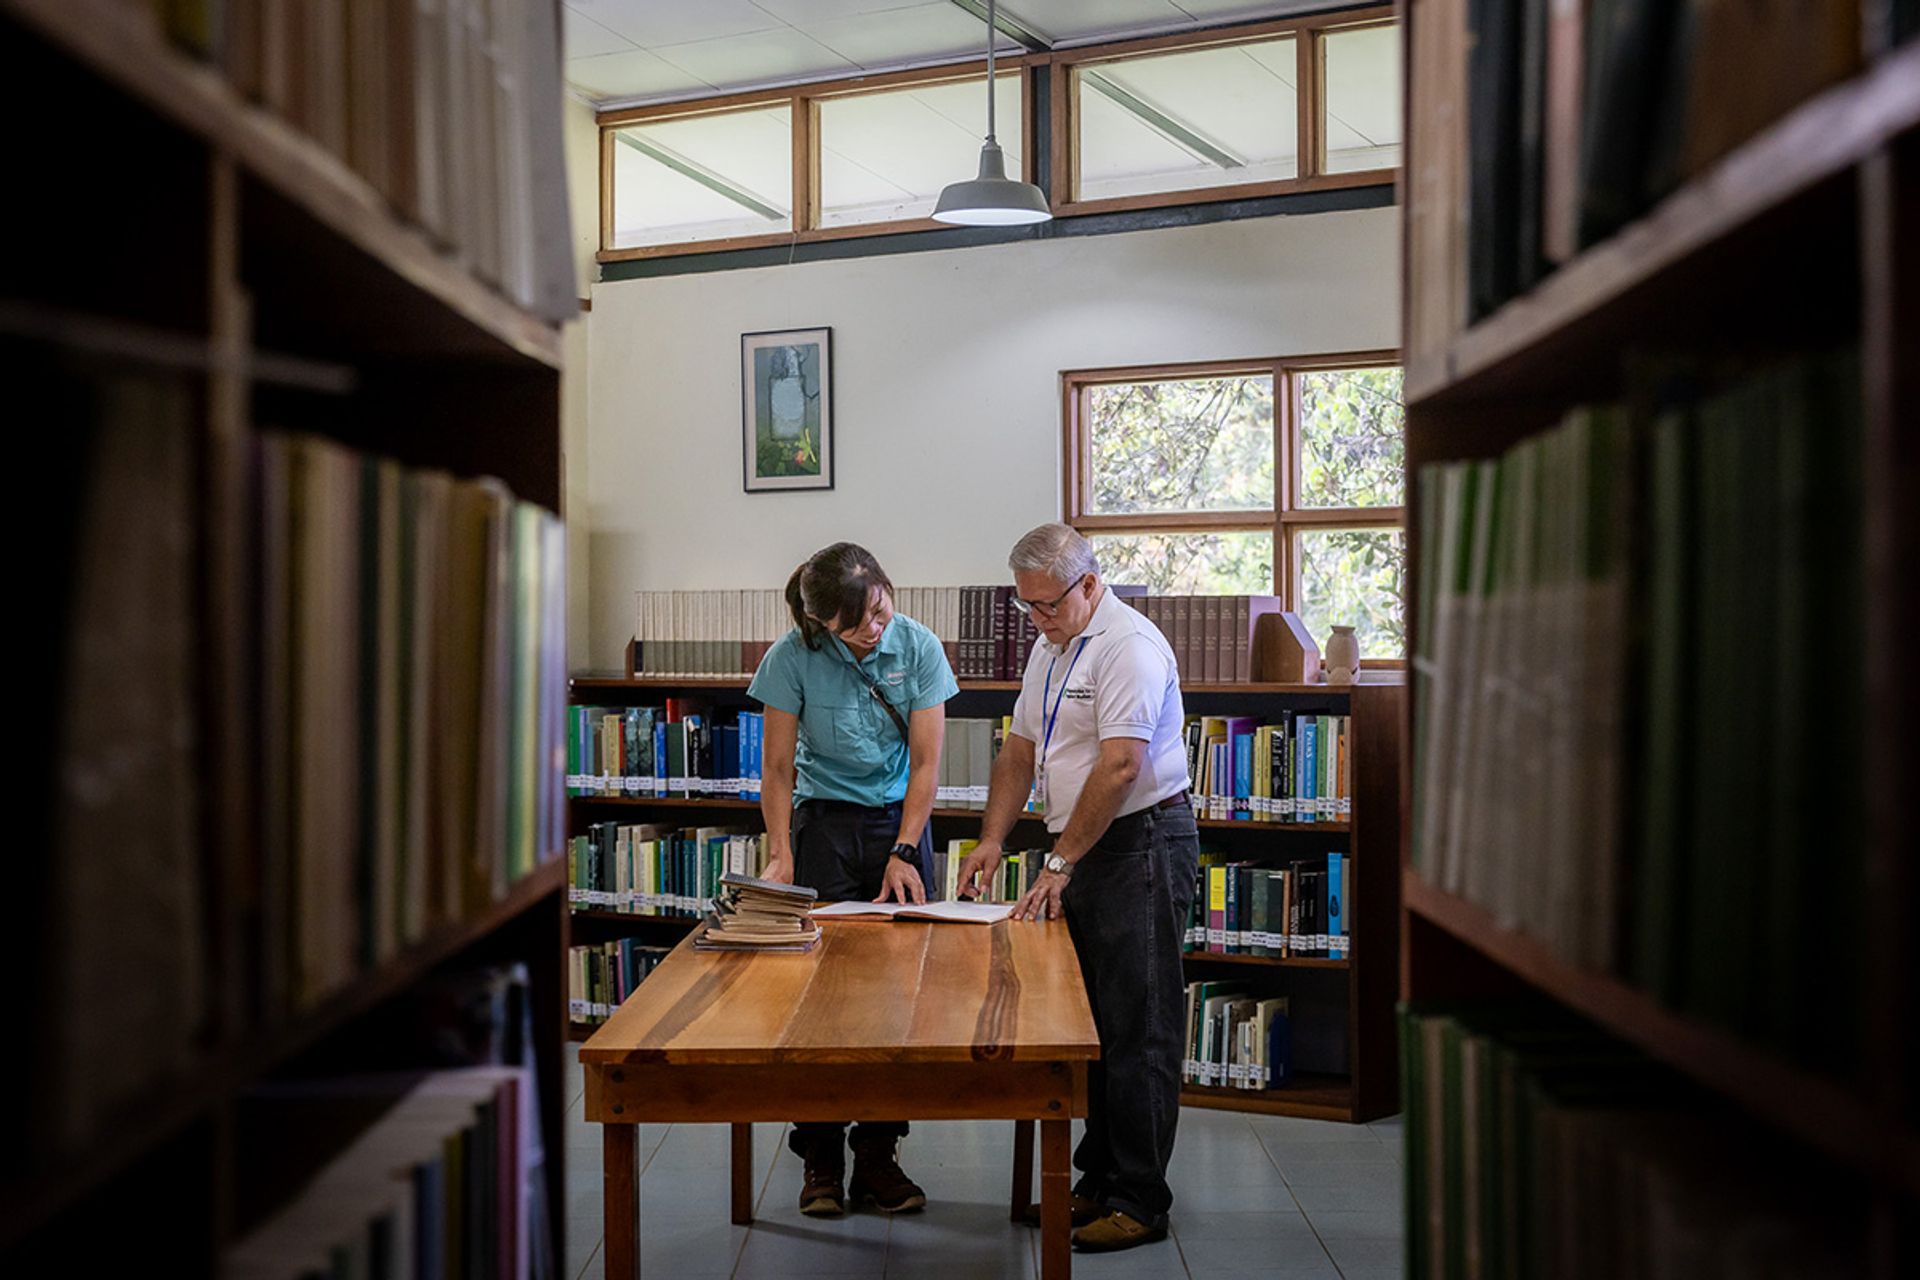 Ms Xue and Mr Rodolfo Quiros, an academic and research manager at Las Cruces Research Station and the Wilson Botanical Garden, looking through records on Oct 2, 2023 that they had uncovered during an earlier visit by Ms Xue in June. The garden, founded in 1962, was acquired in 1973 by the Organization for Tropical Studies.